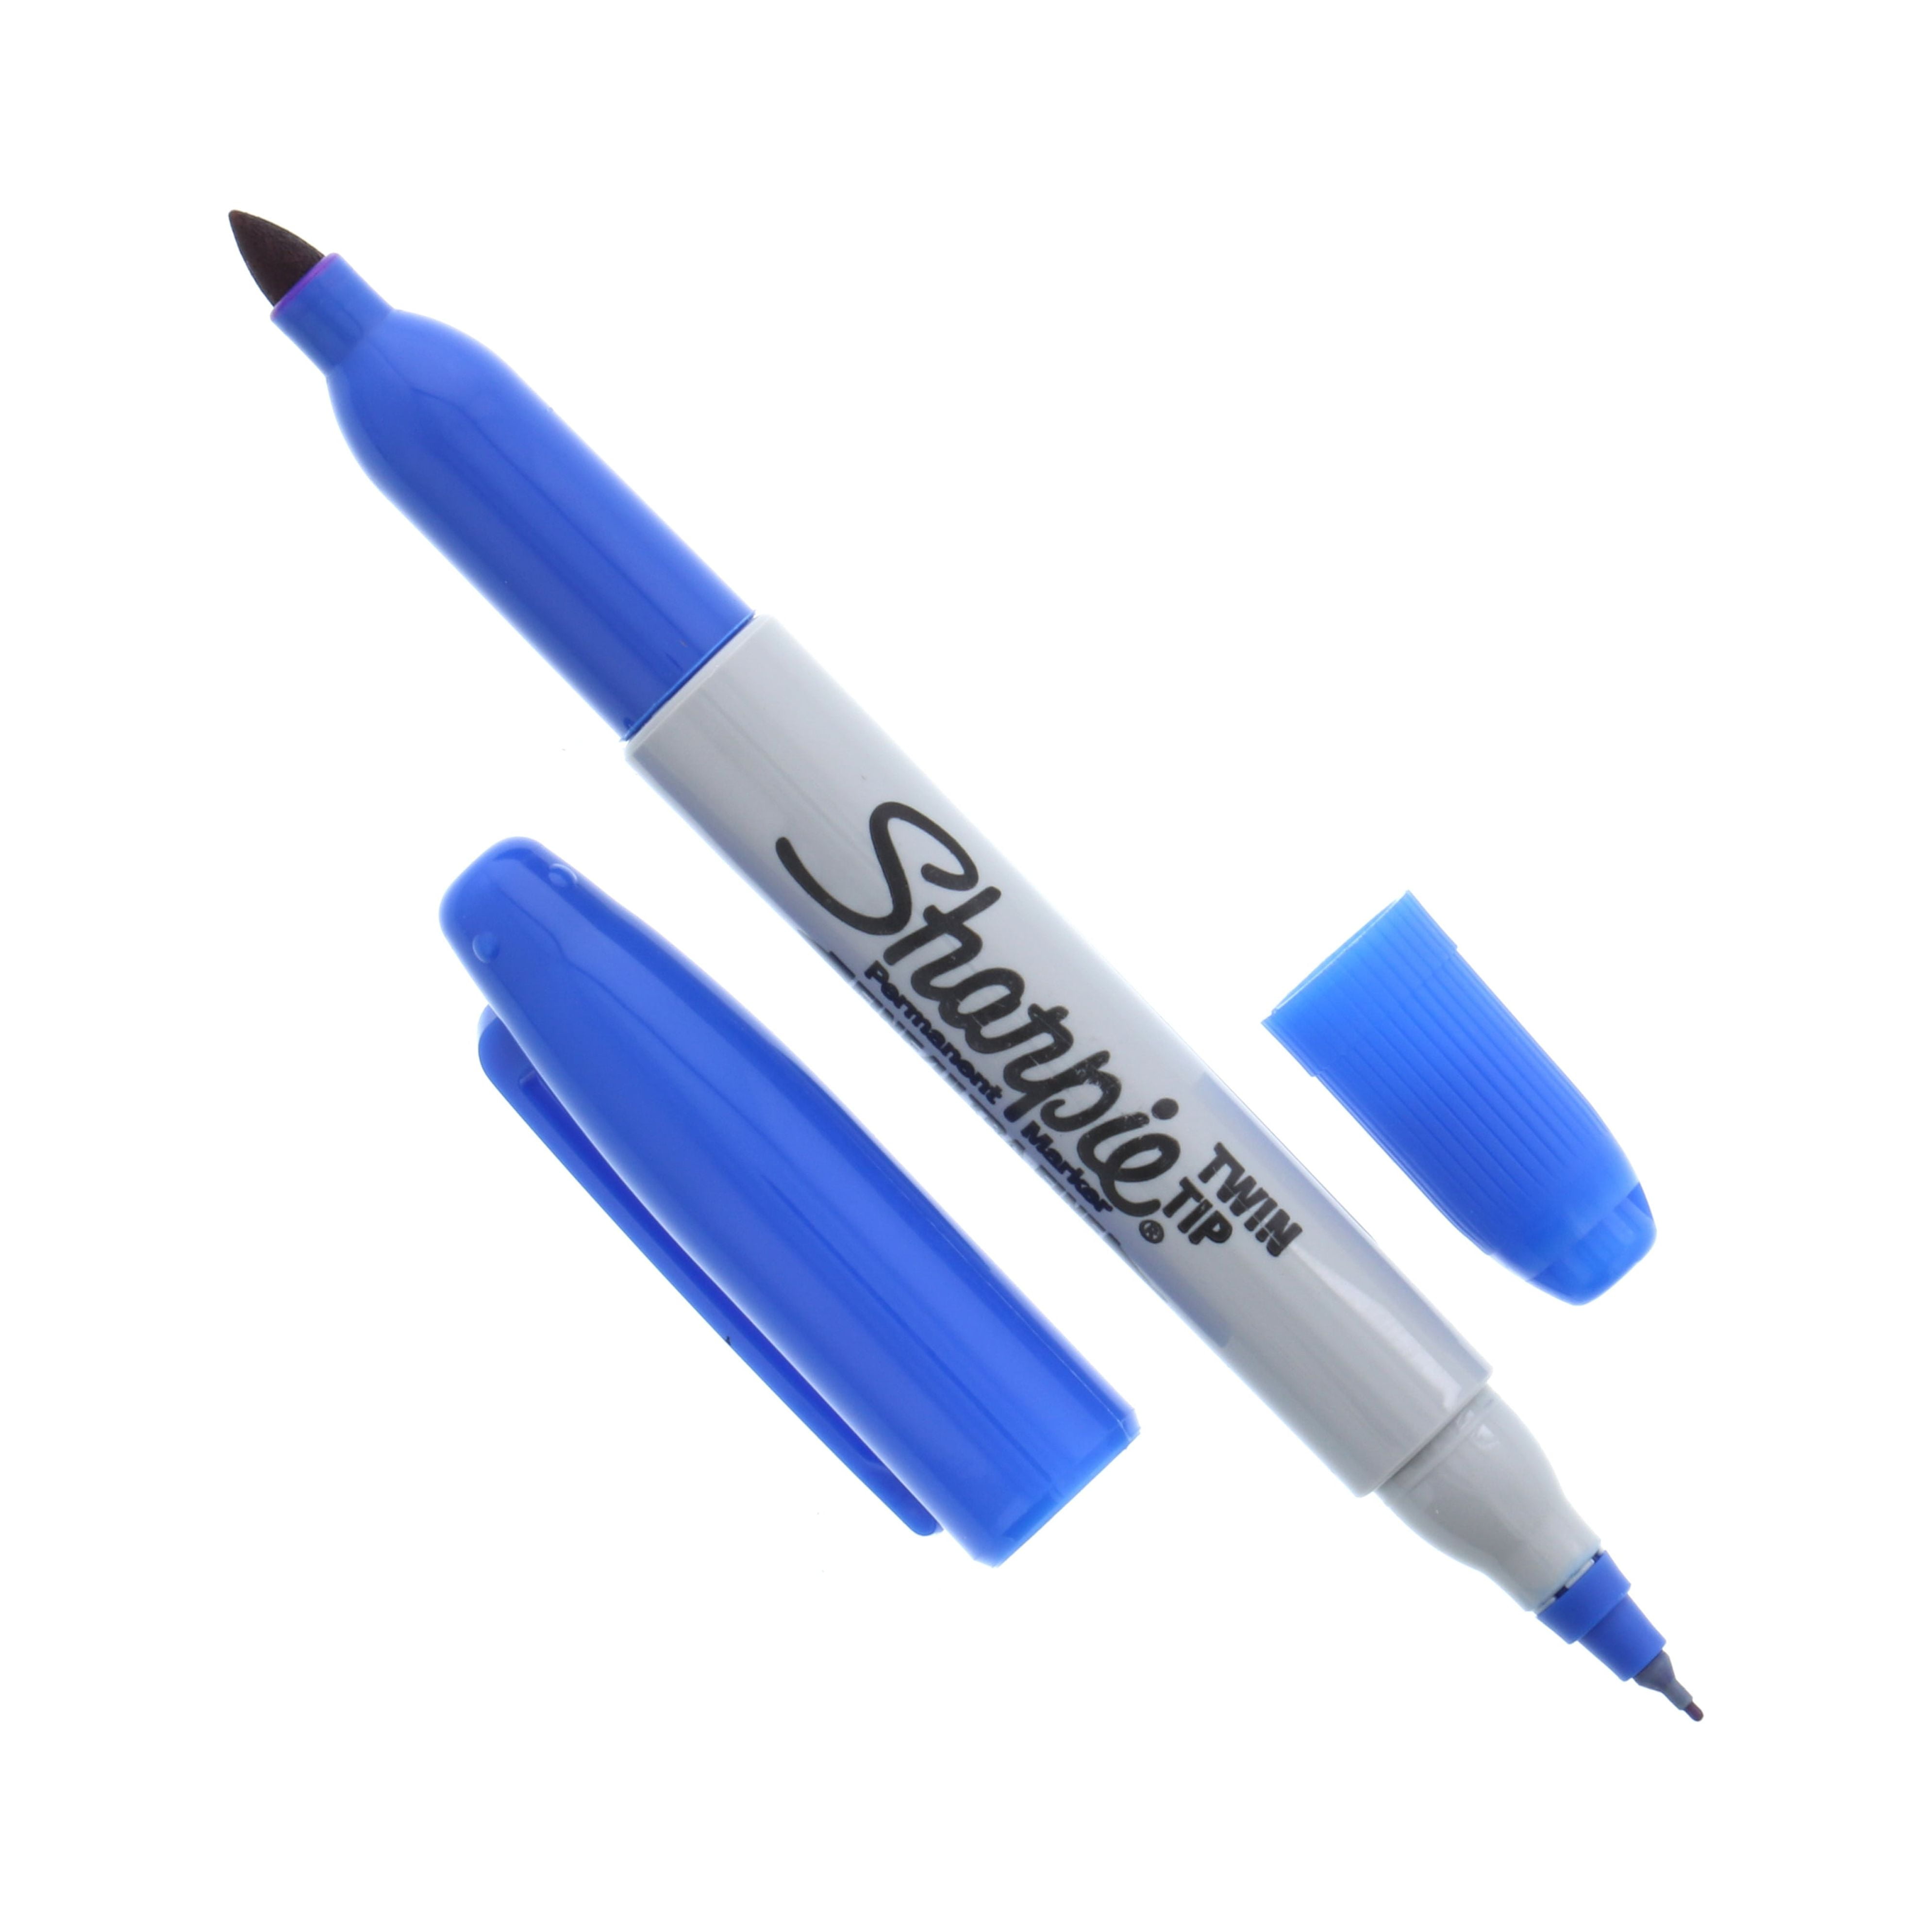 2x Sharpie Twin Tip Permanent Marker Pen Navy Blue Ultra Fine and Fine Tips